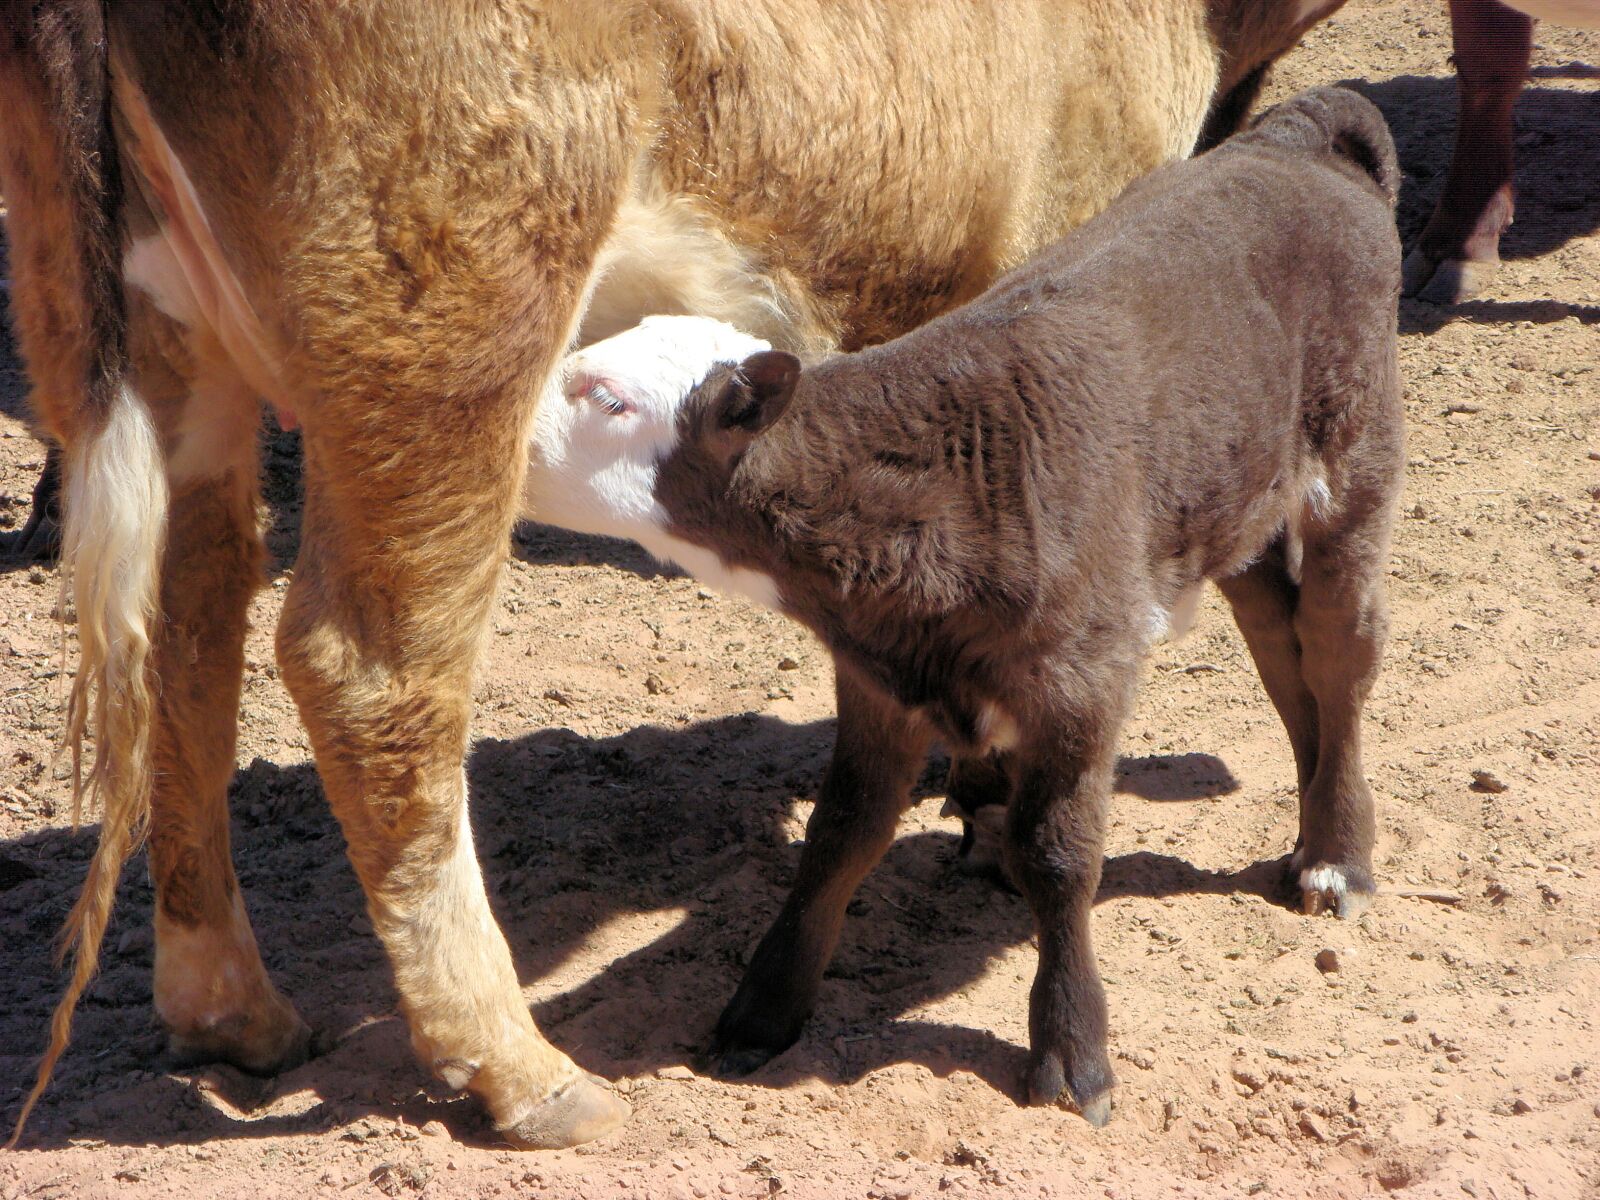 Sony DSC-T100 sample photo. Calf, cow, drinking photography